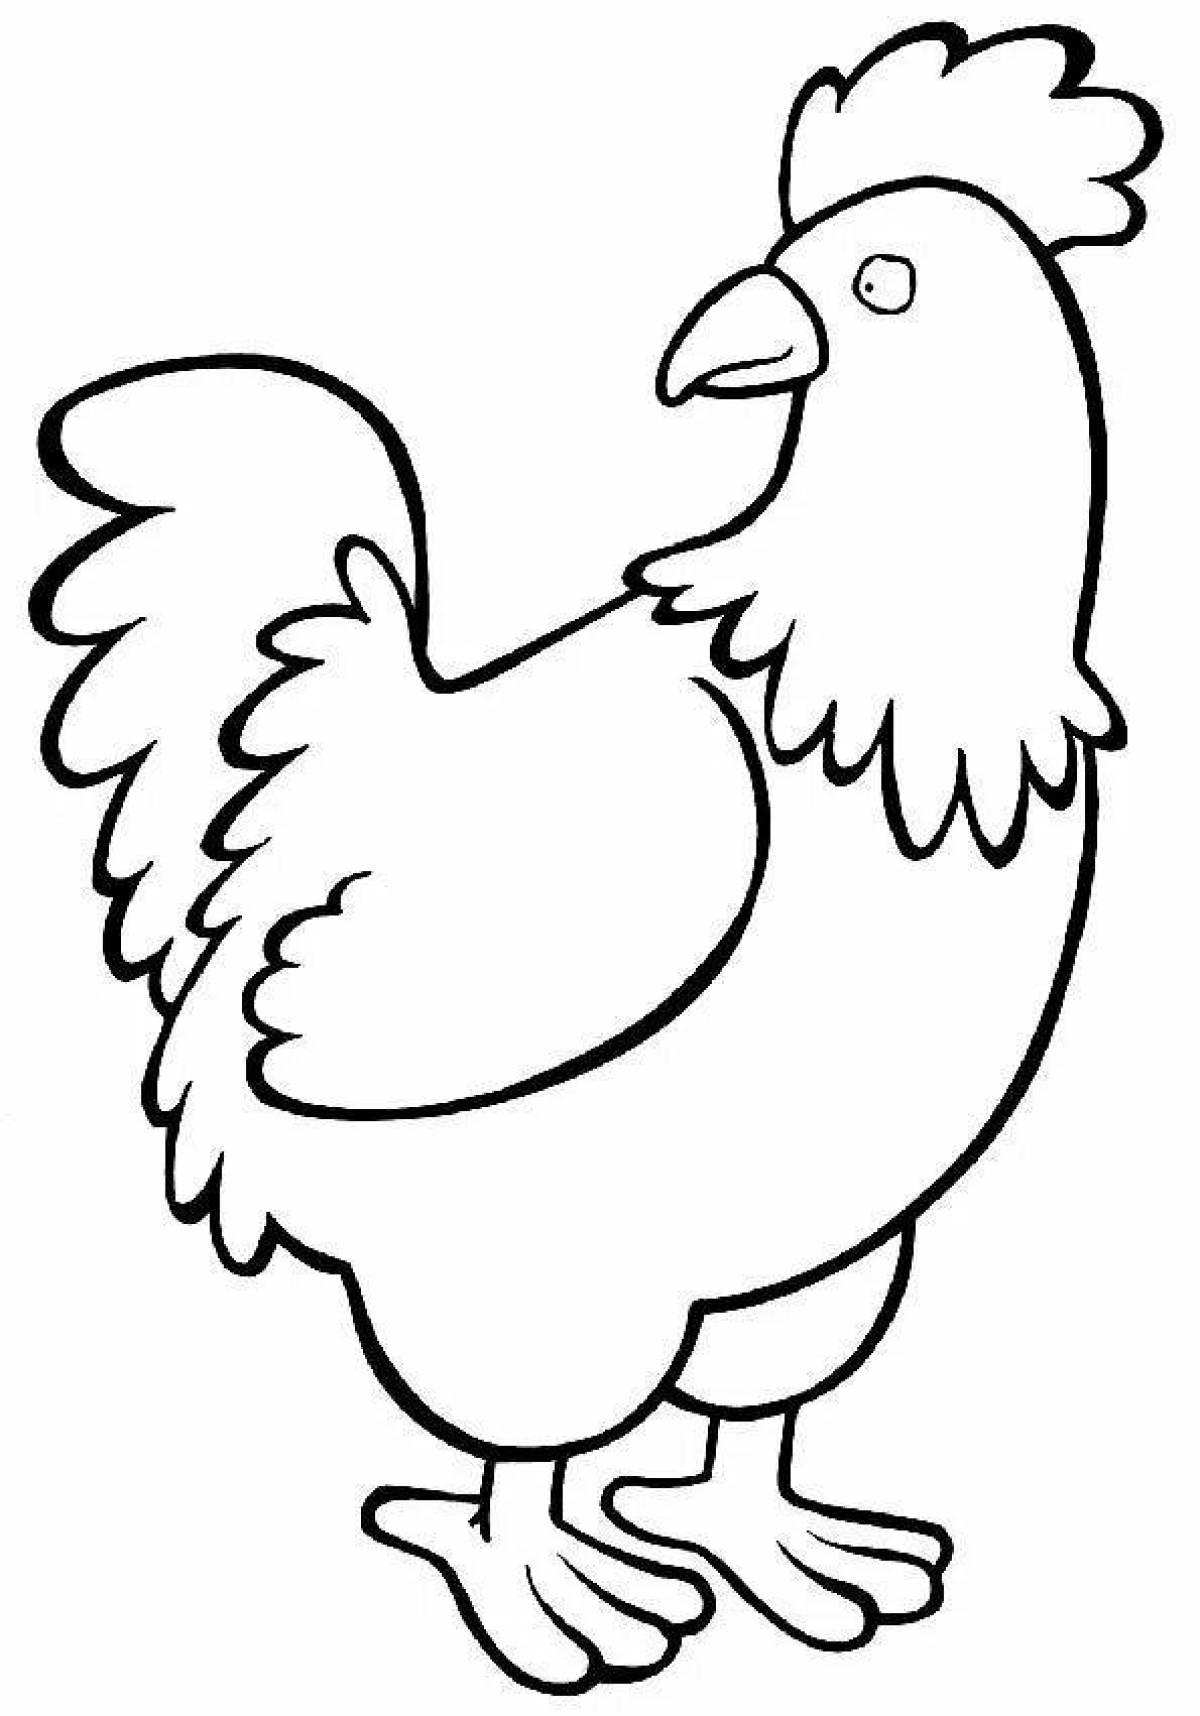 Animated rooster coloring page for kids